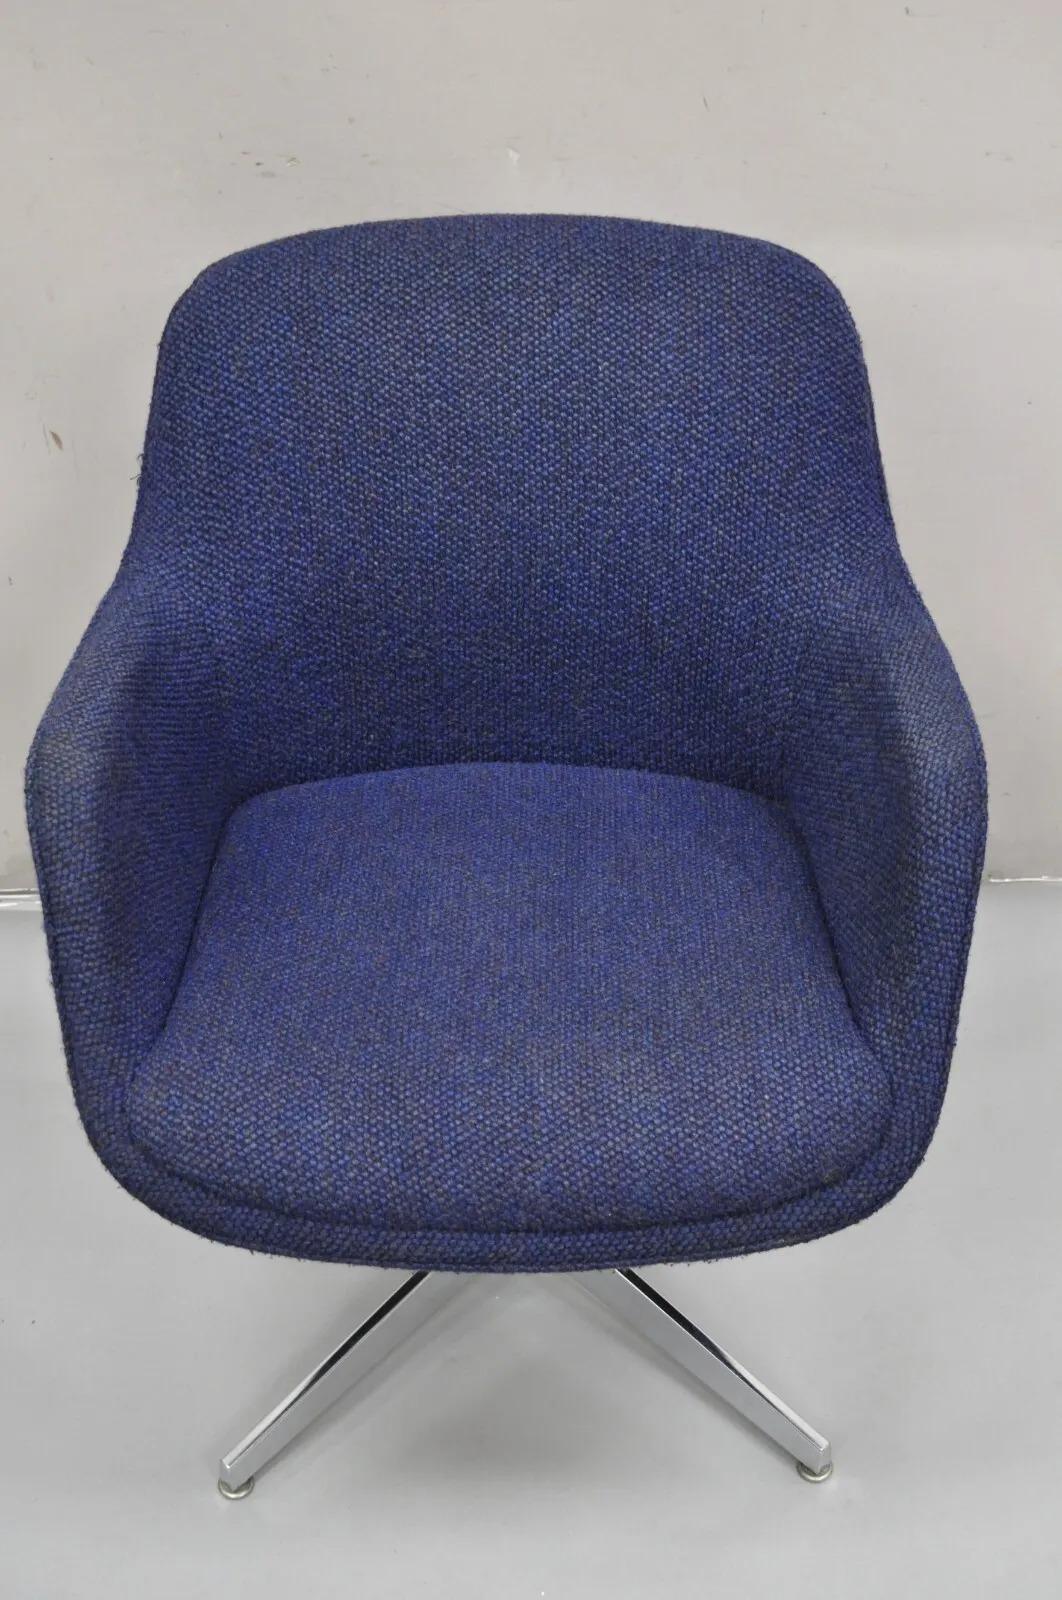 20th Century Vintage Mid Century Modern Blue Upholstered Chrome Swivel Base Club Arm Chair For Sale